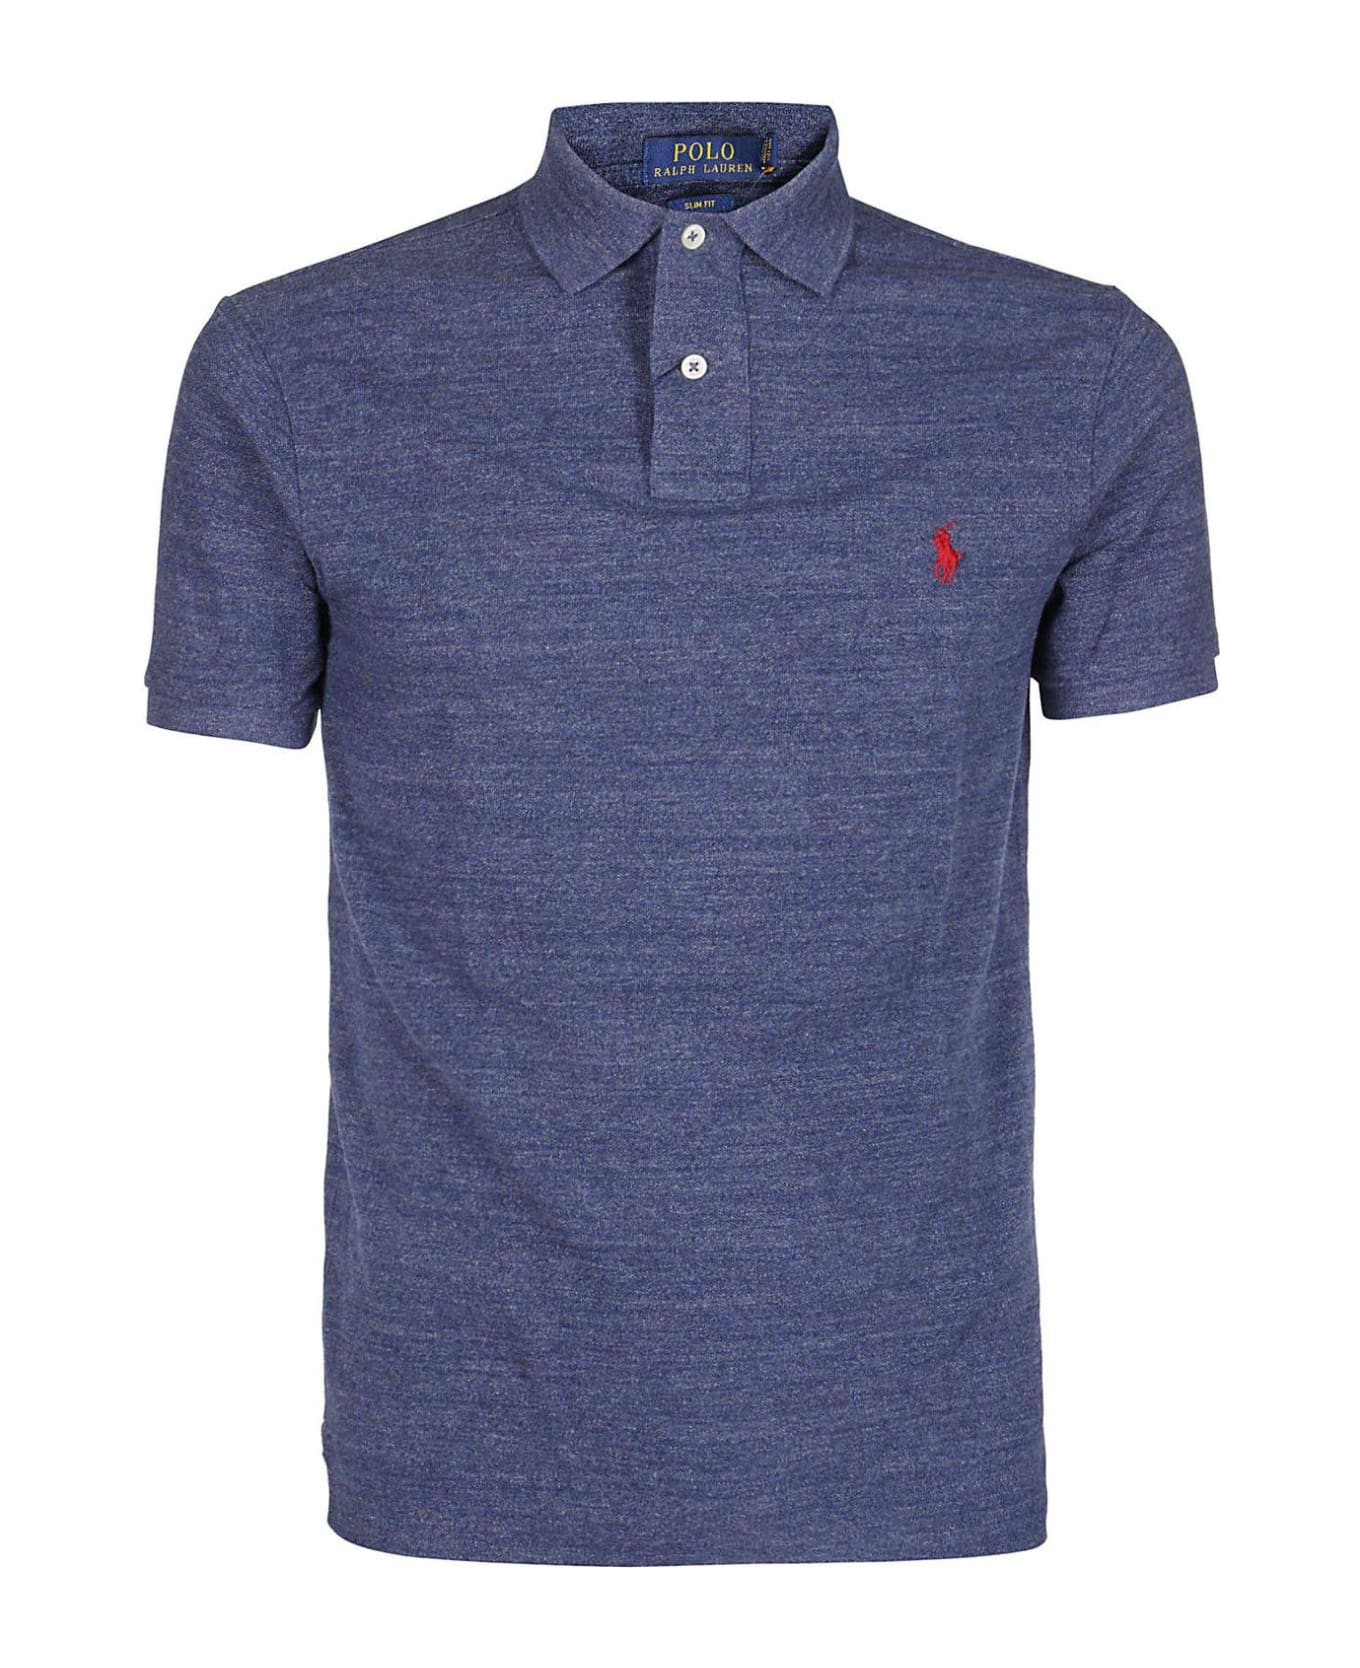 Polo Ralph Lauren Logo Embroidered Polo Shirt - Blue ポロシャツ